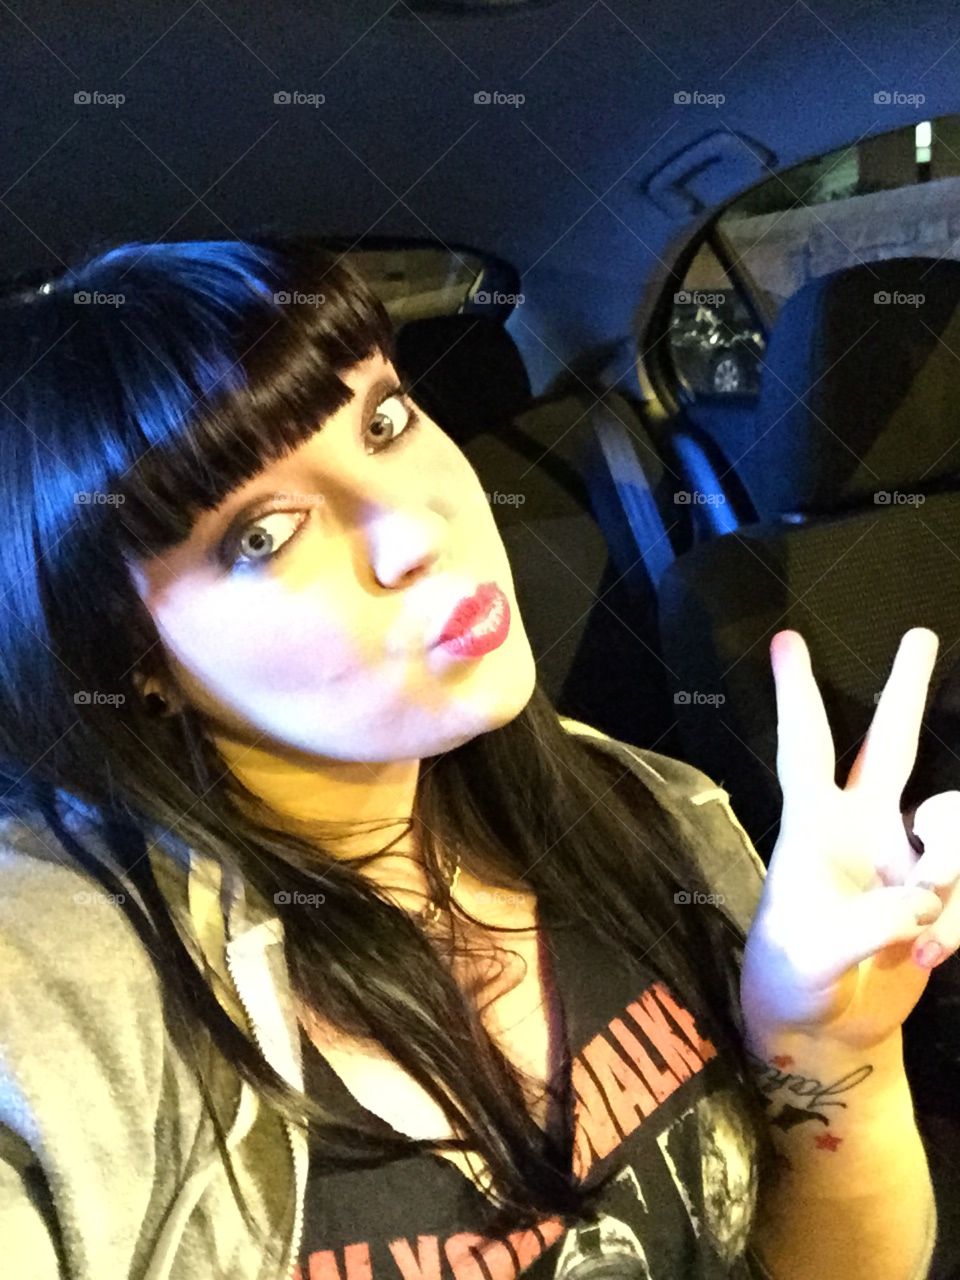 Beautiful girl showing victory sign inside car